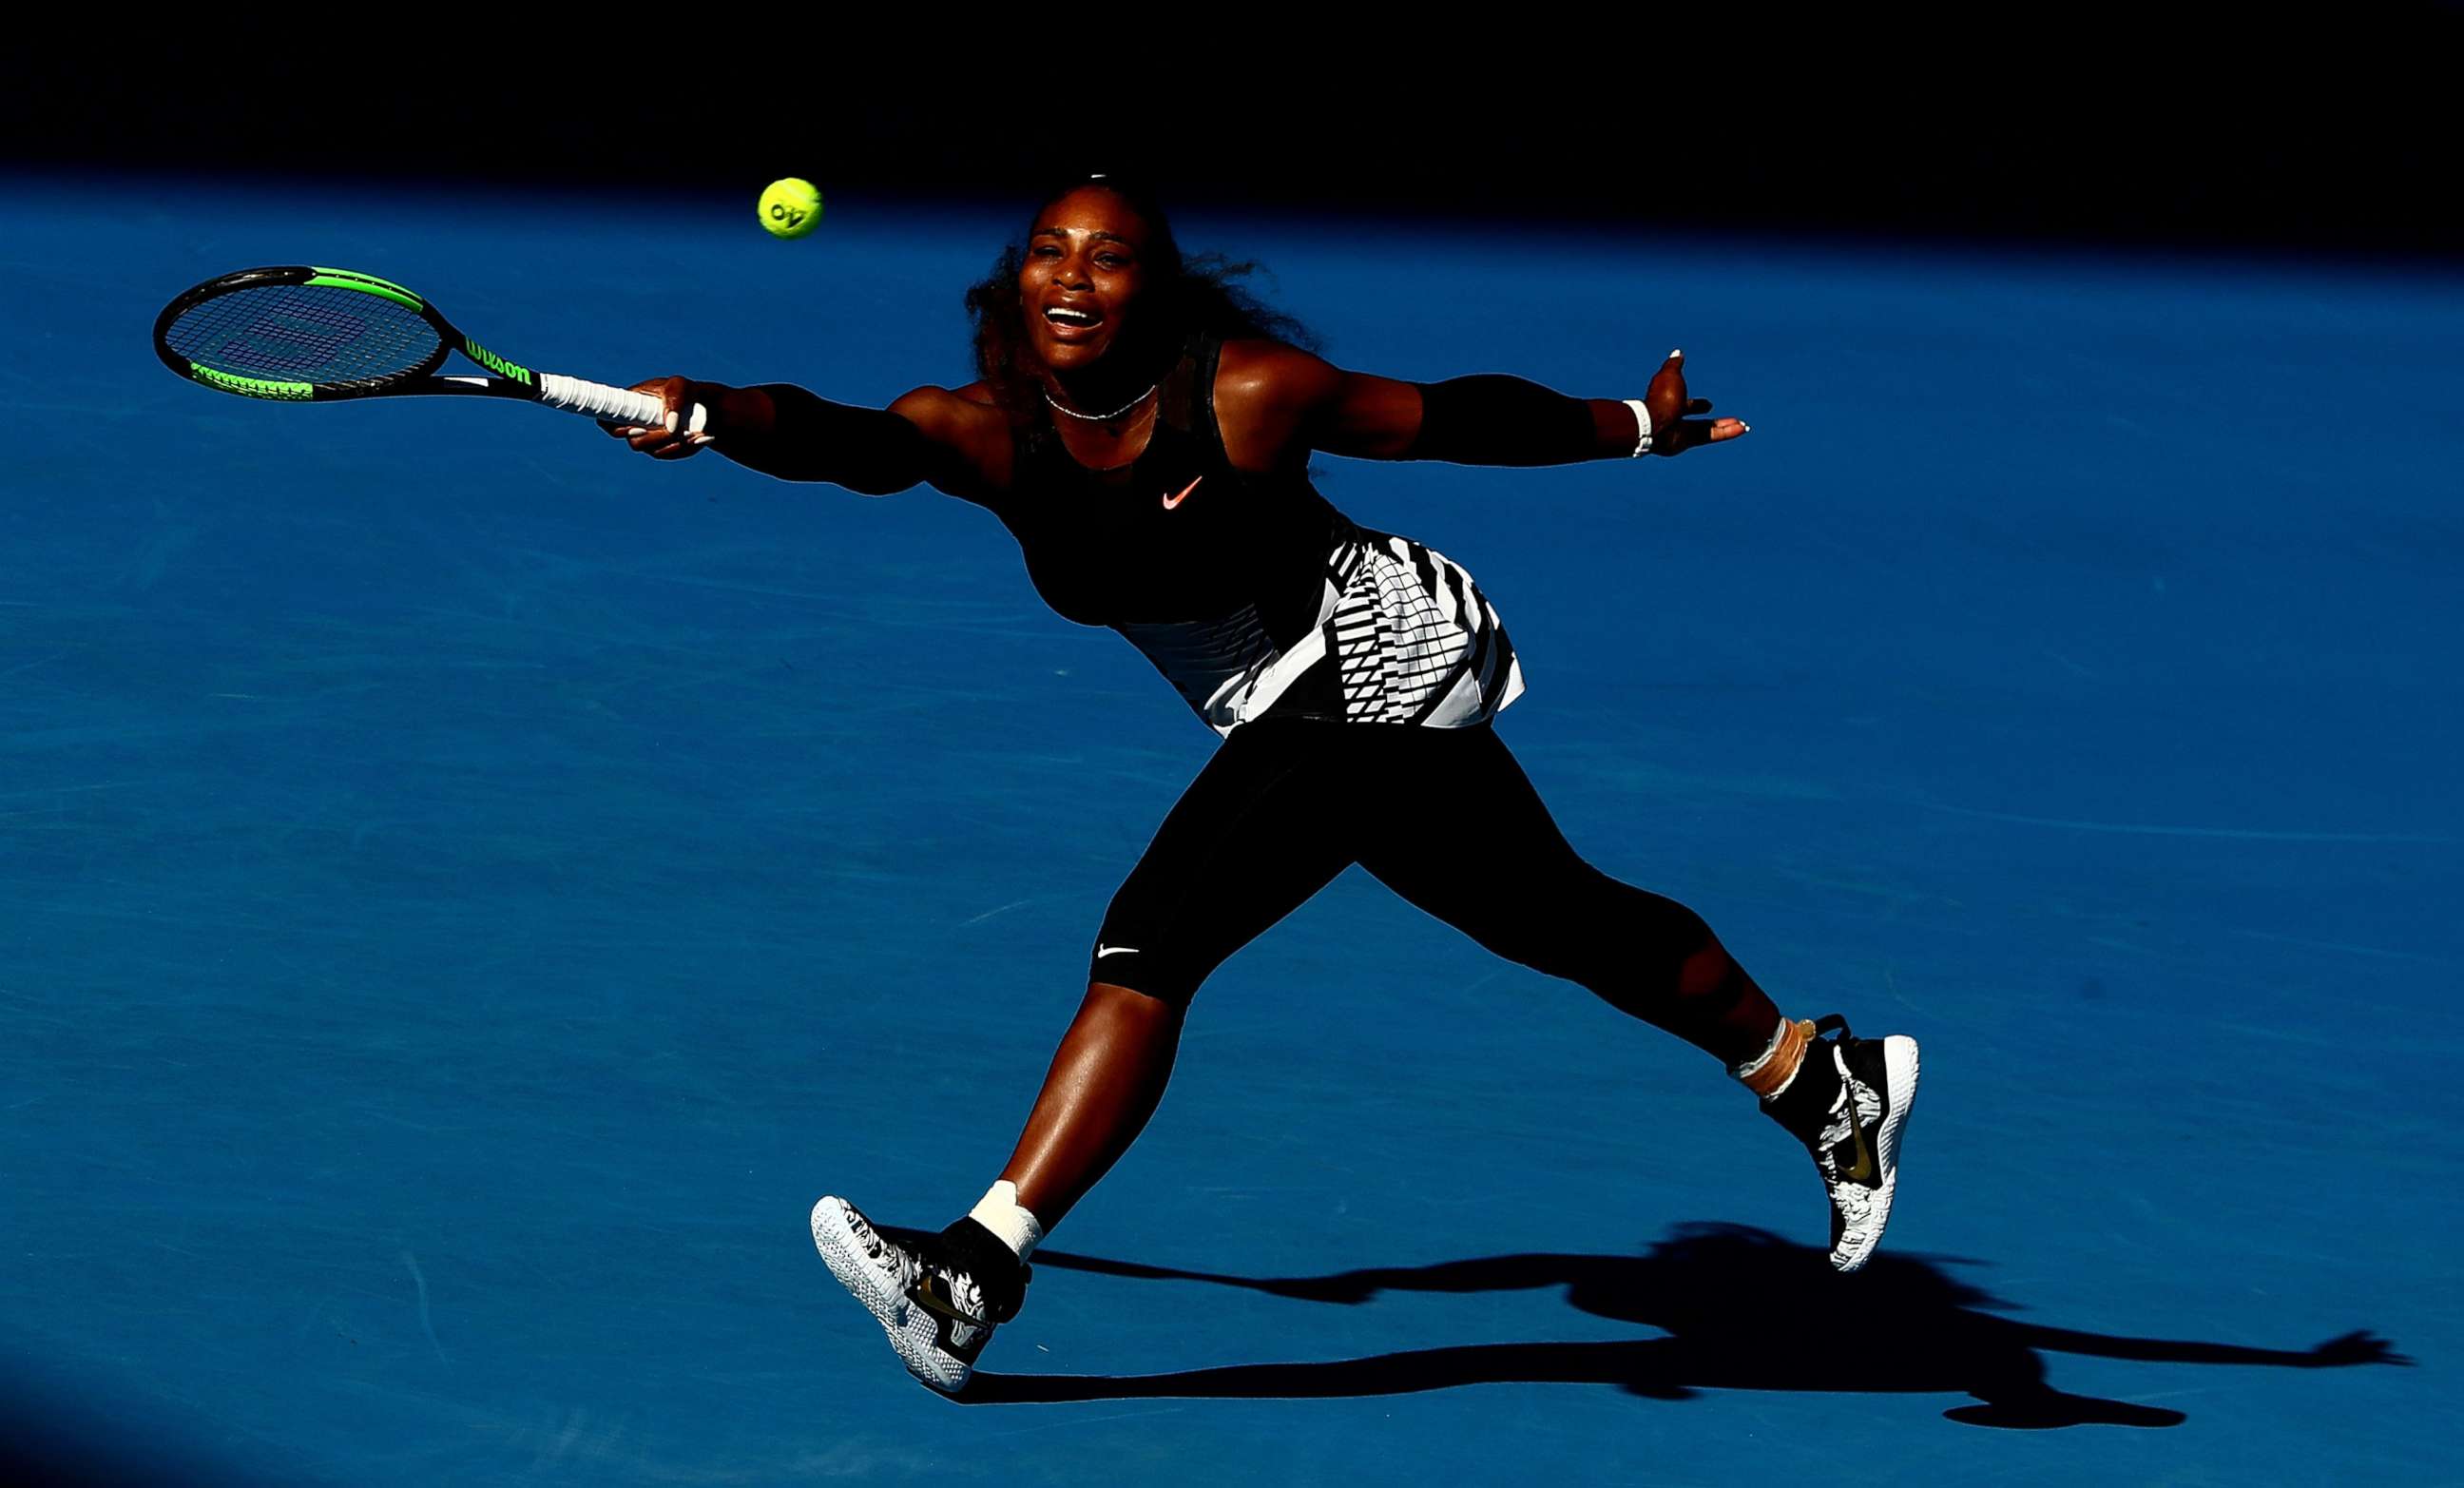 PHOTO: Serena Williams of the United States plays a forehand in her semifinal match against Mirjana Lucic-Baroni of Croatia on day 11 of the 2017 Australian Open at Melbourne Park, Jan. 26, 2017 in Melbourne, Australia.